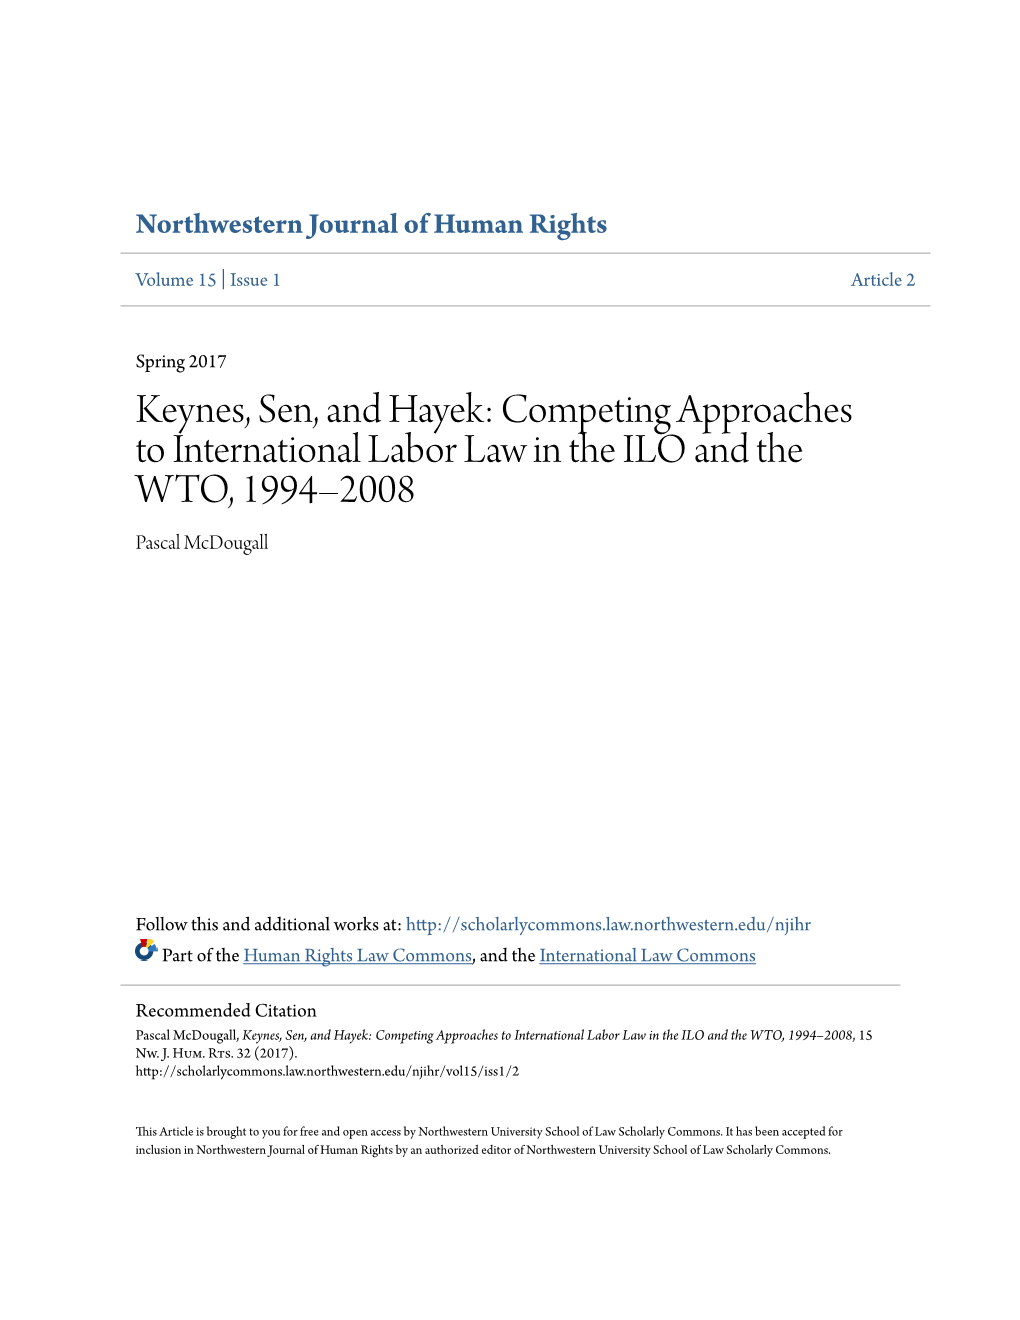 Keynes, Sen, and Hayek: Competing Approaches to International Labor Law in the ILO and the WTO, 1994–2008 Pascal Mcdougall